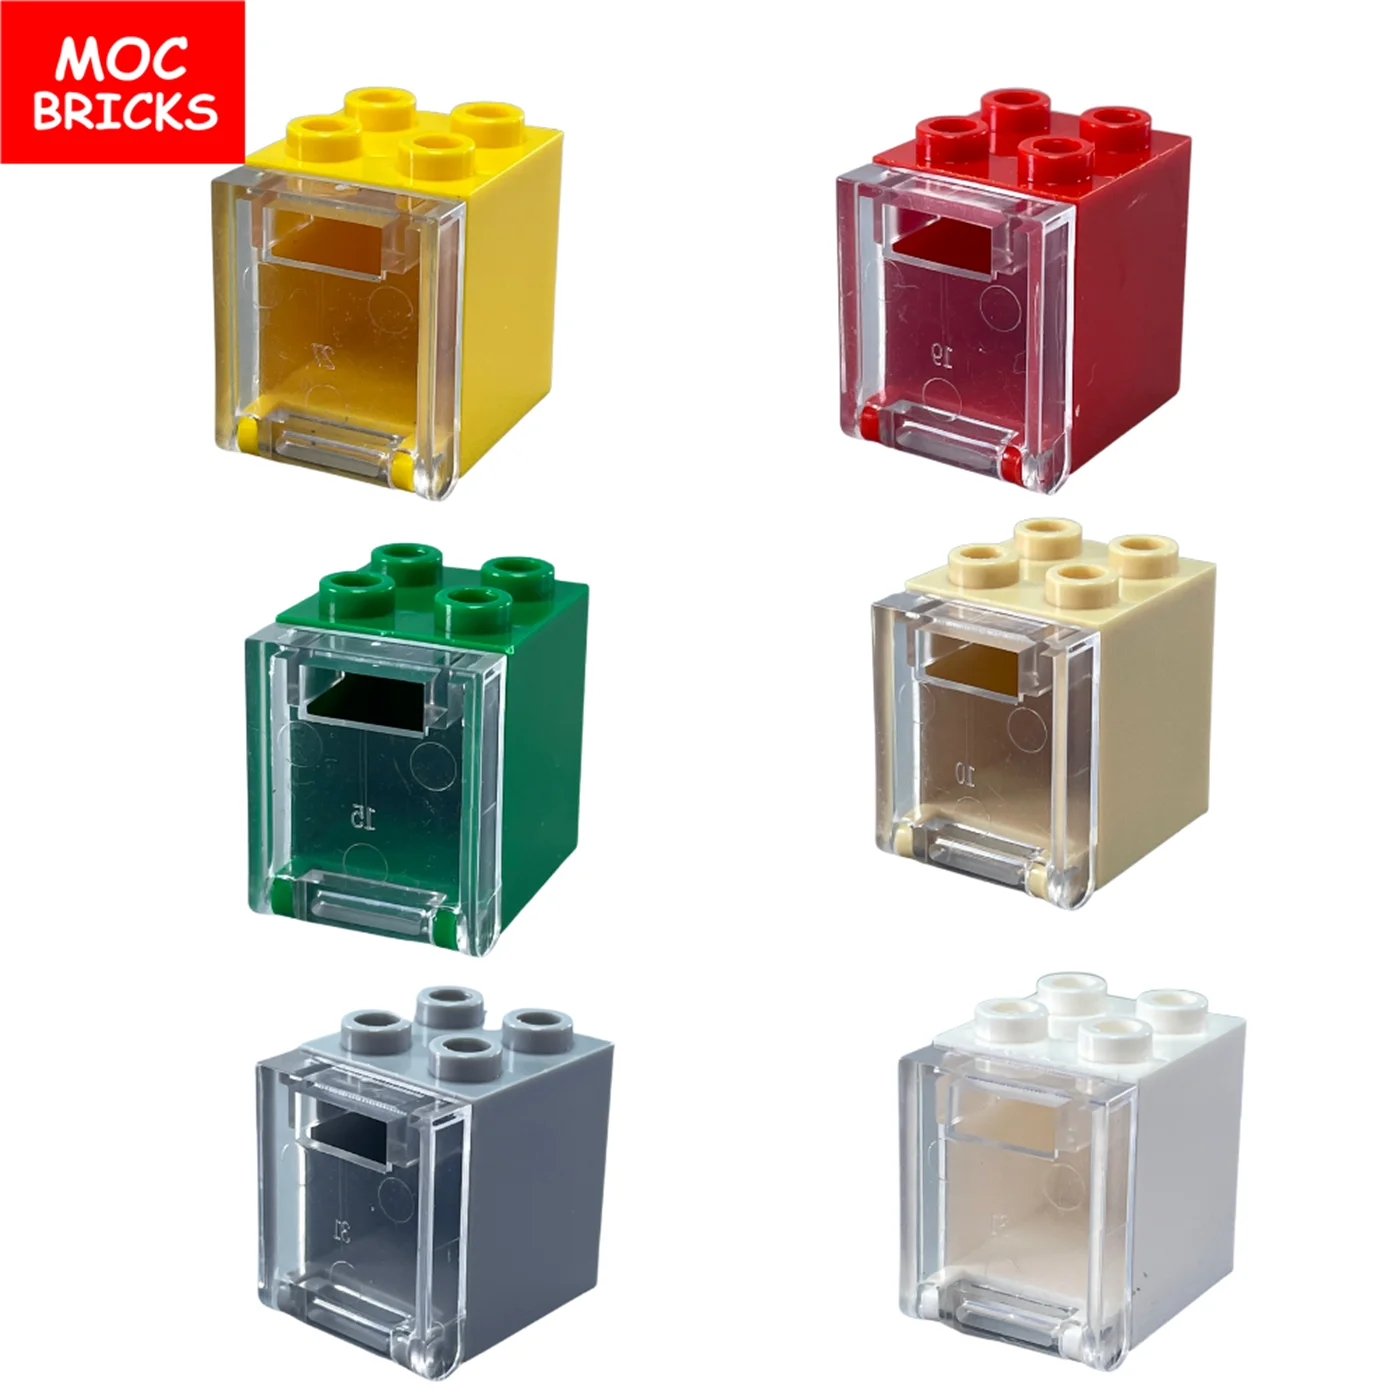 LEGO Red 2x2x2 Container with Clear Door